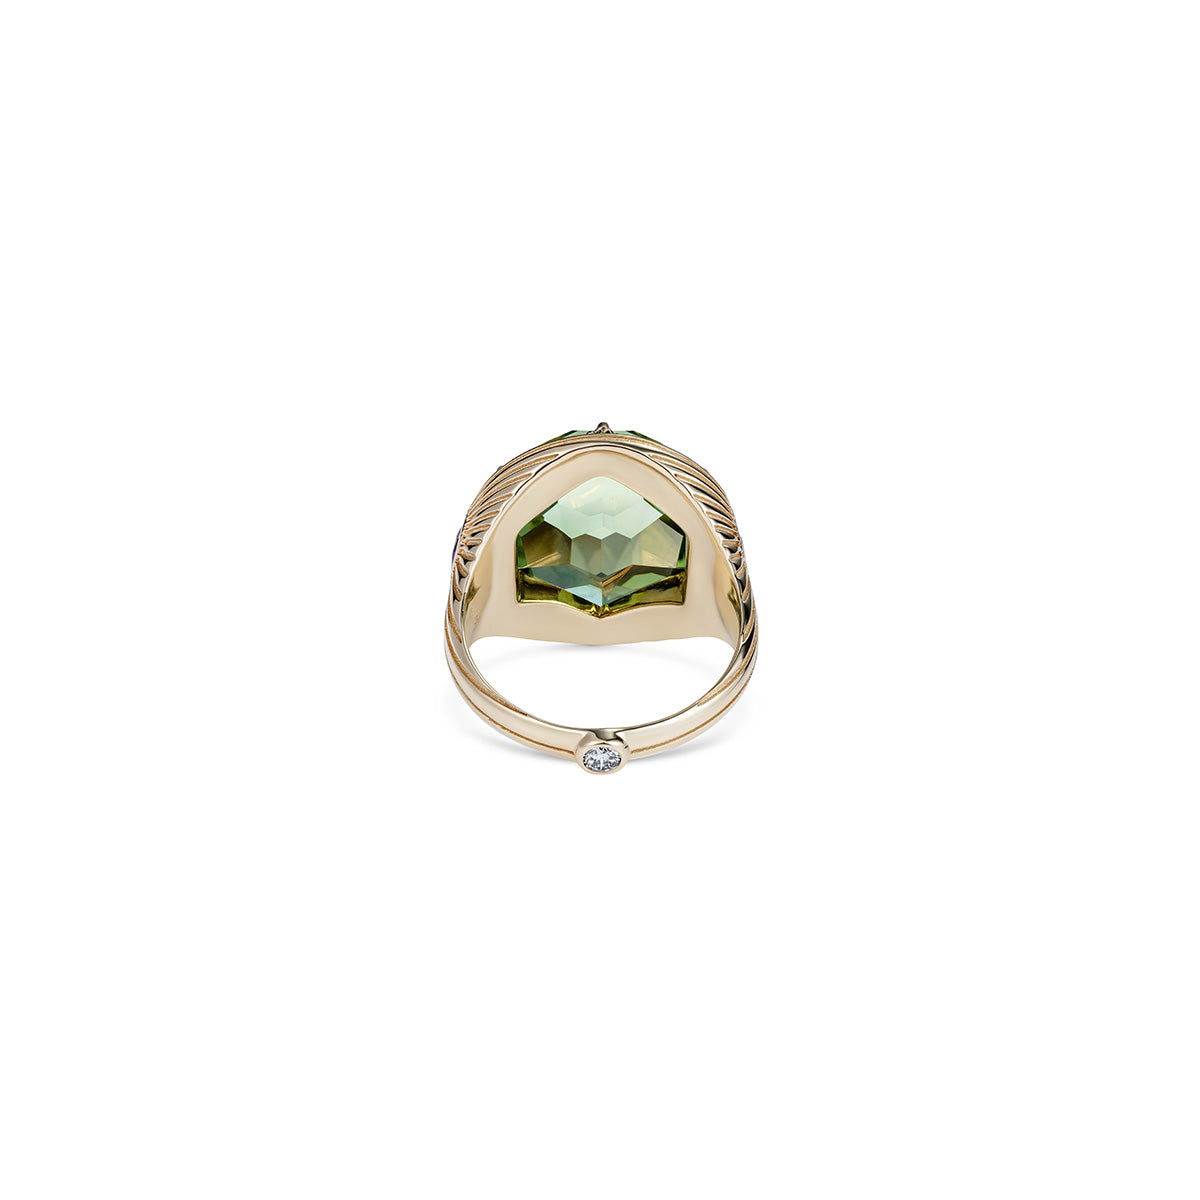 Noor Fares Green Amethyst Ring with Coloured Sapphire Pavé